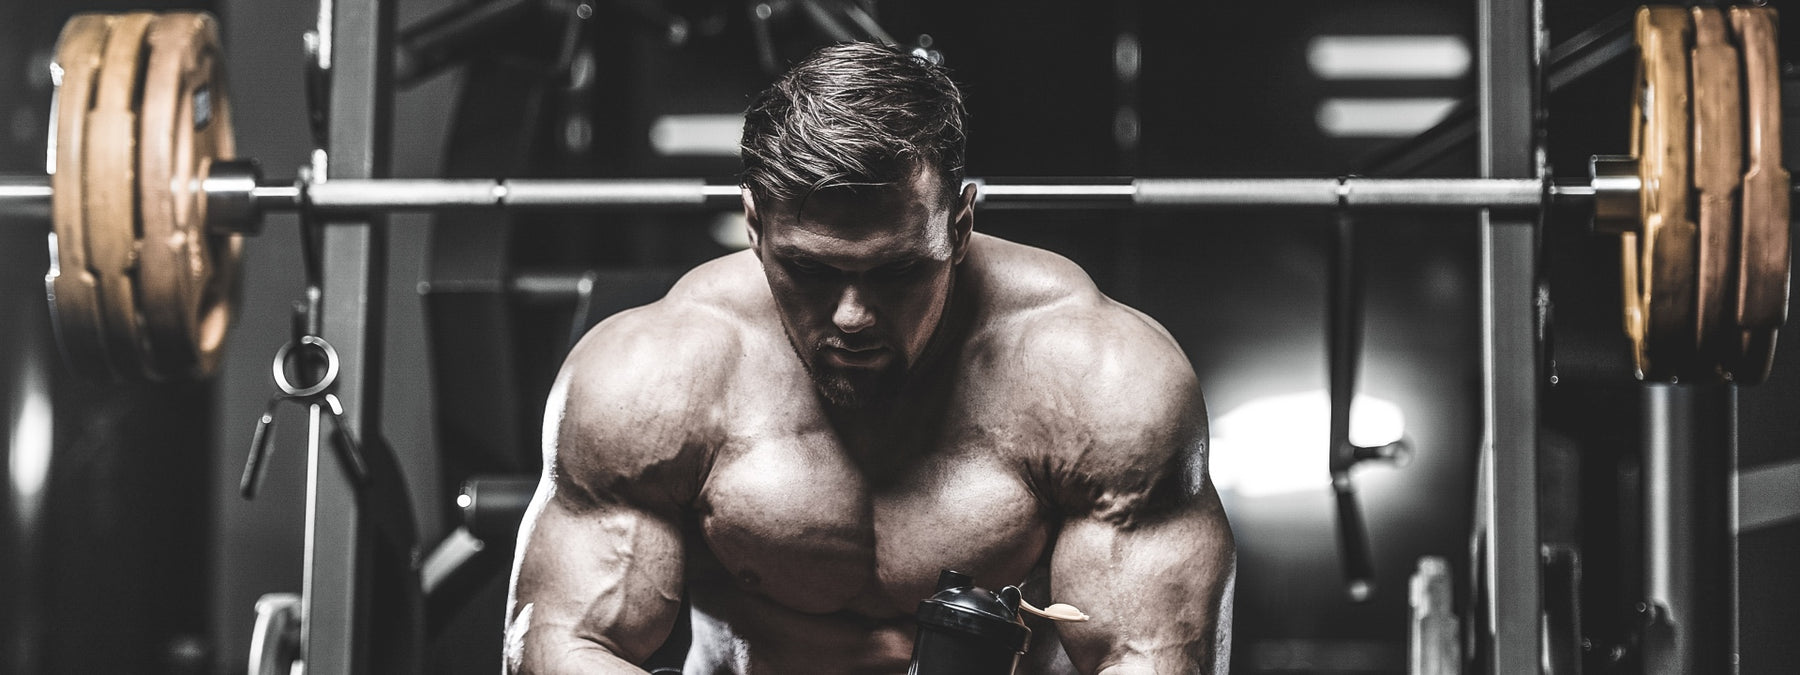 Powerlifting for Bodybuilders: From Chasing Pumps to Chasing Plates